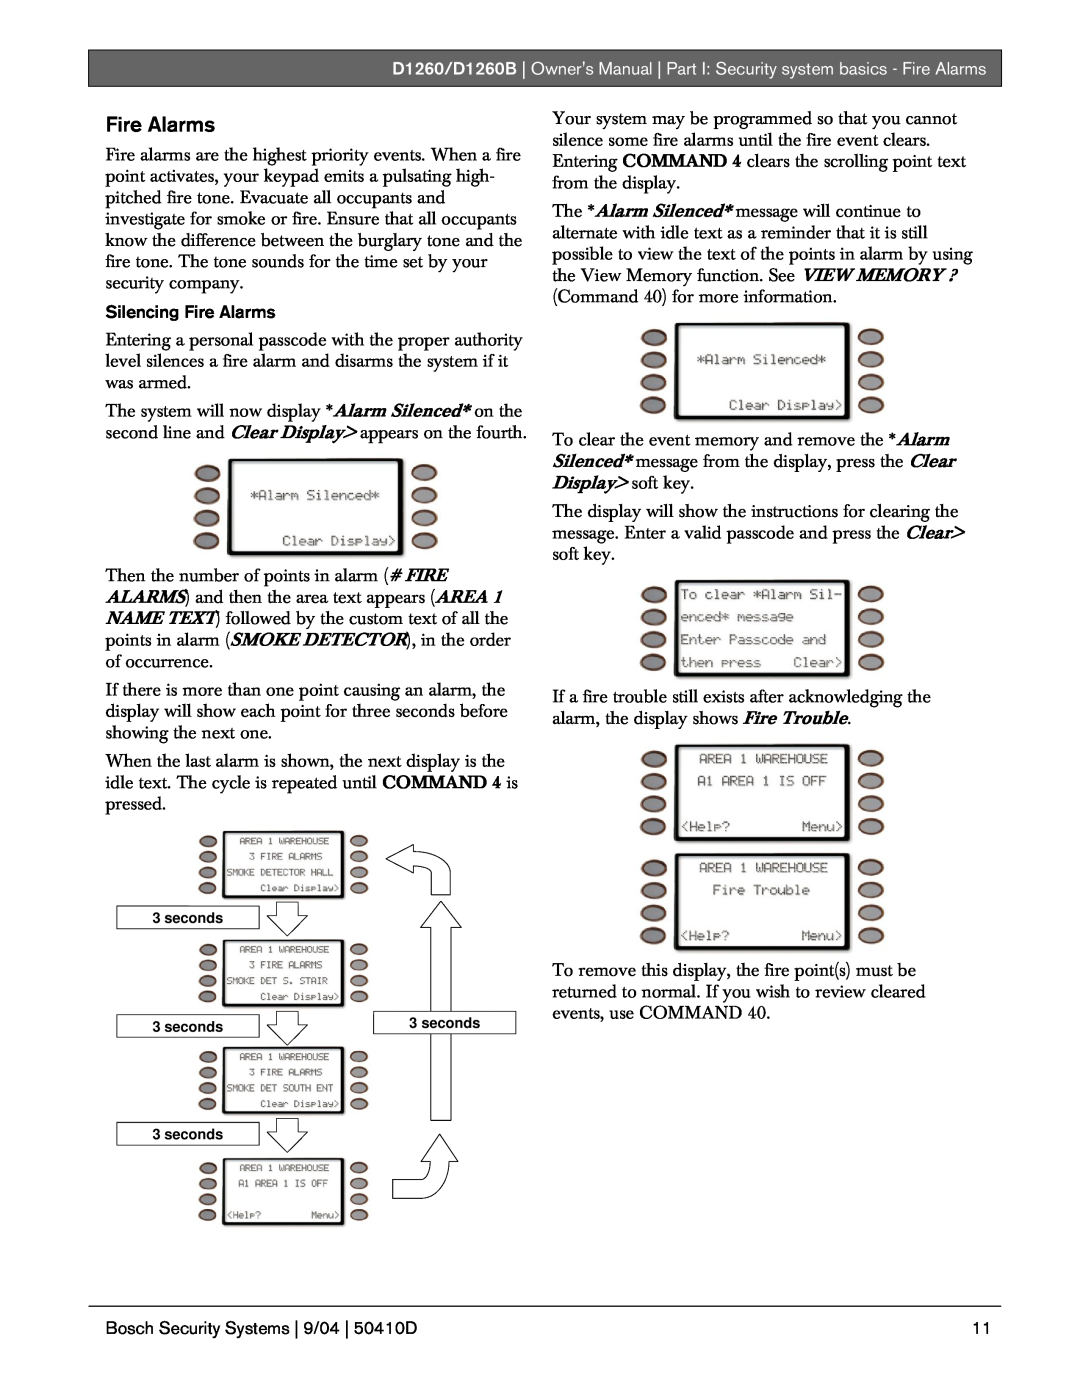 Bosch Appliances D1260B owner manual Silencing Fire Alarms, Bosch Security Systems | 9/04 | 50410D 